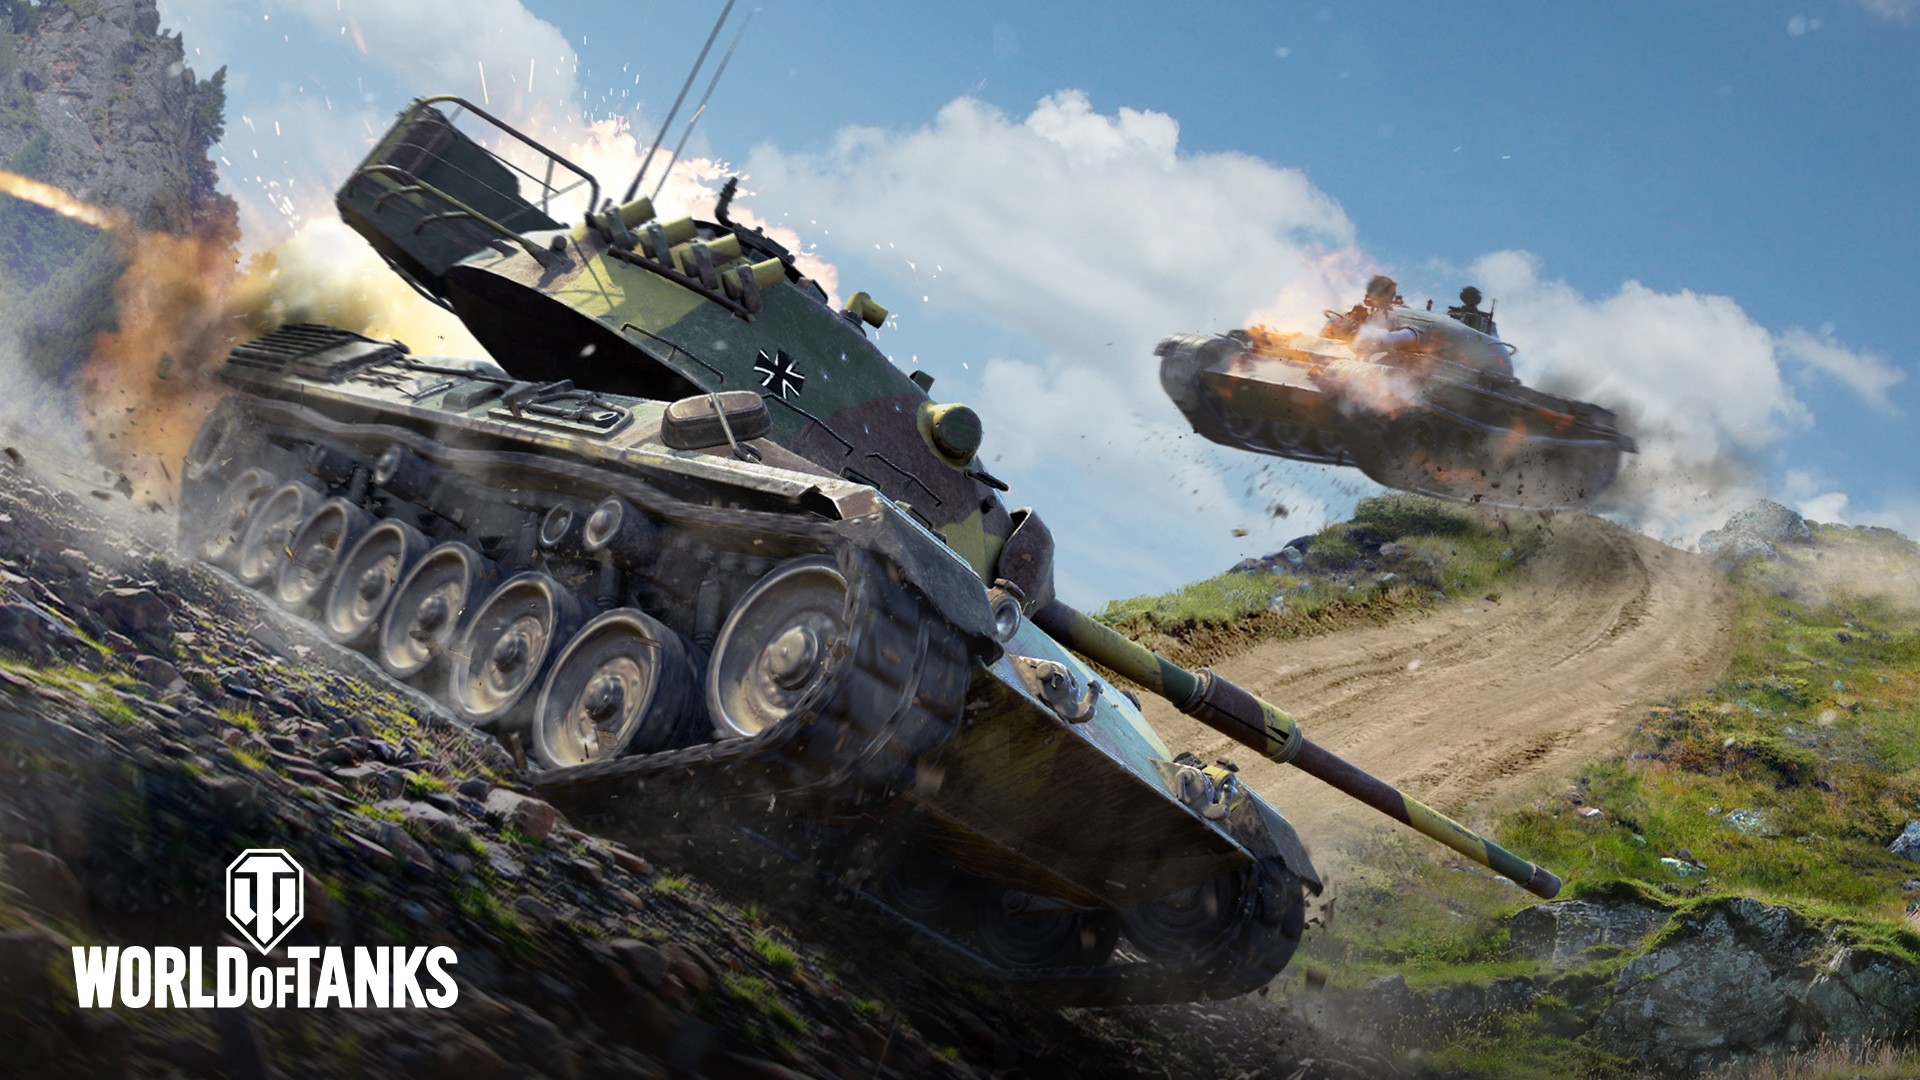 600 units of military equipment and 11 nations: World of Tanks is out on Steam